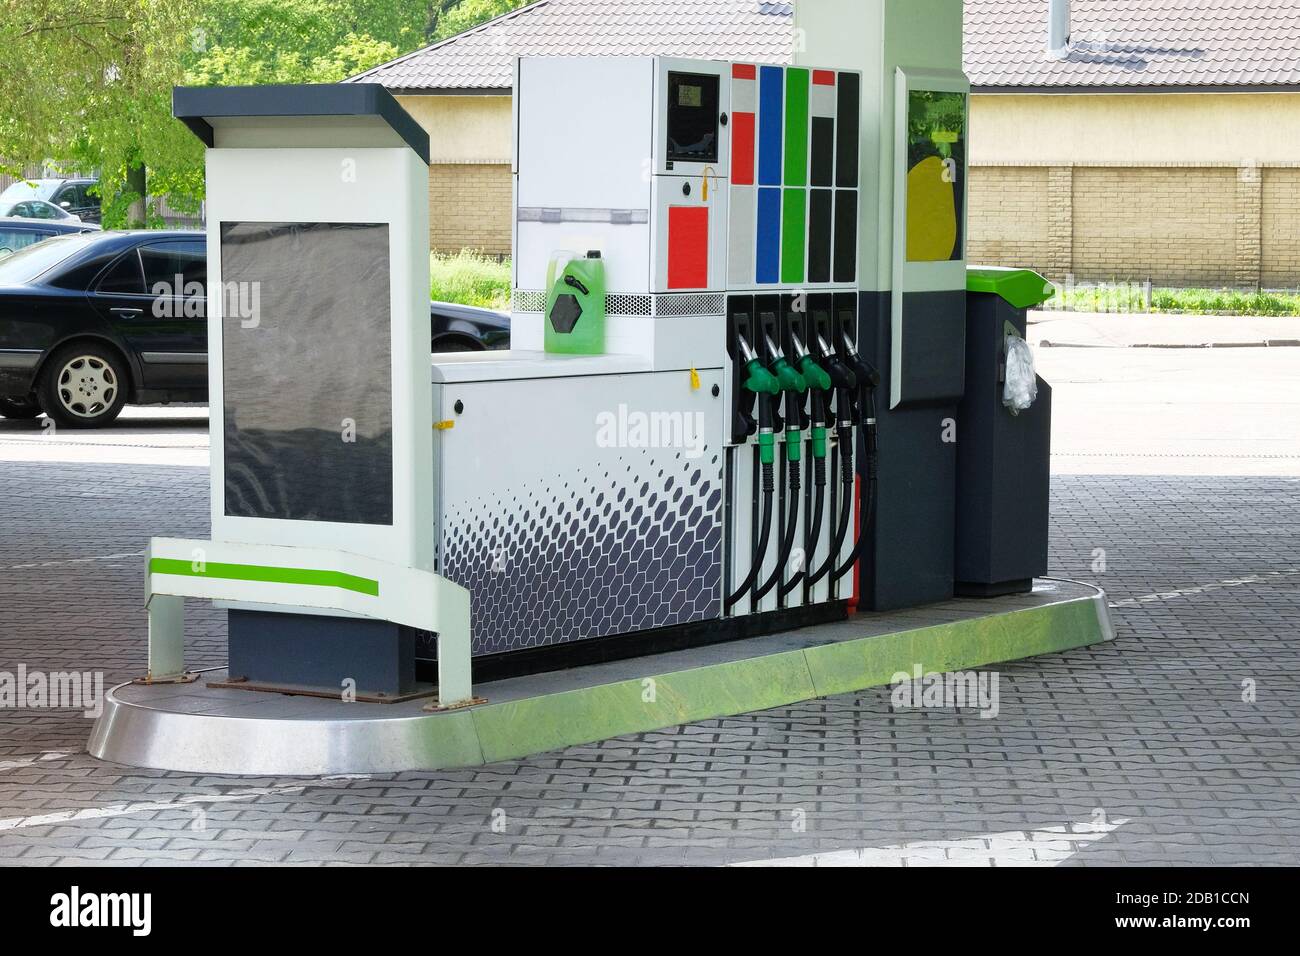 Petrol station pump. Gas station and petroling concept. To fill car with fuel. Gasoline, diesel and oil products. Stock Photo